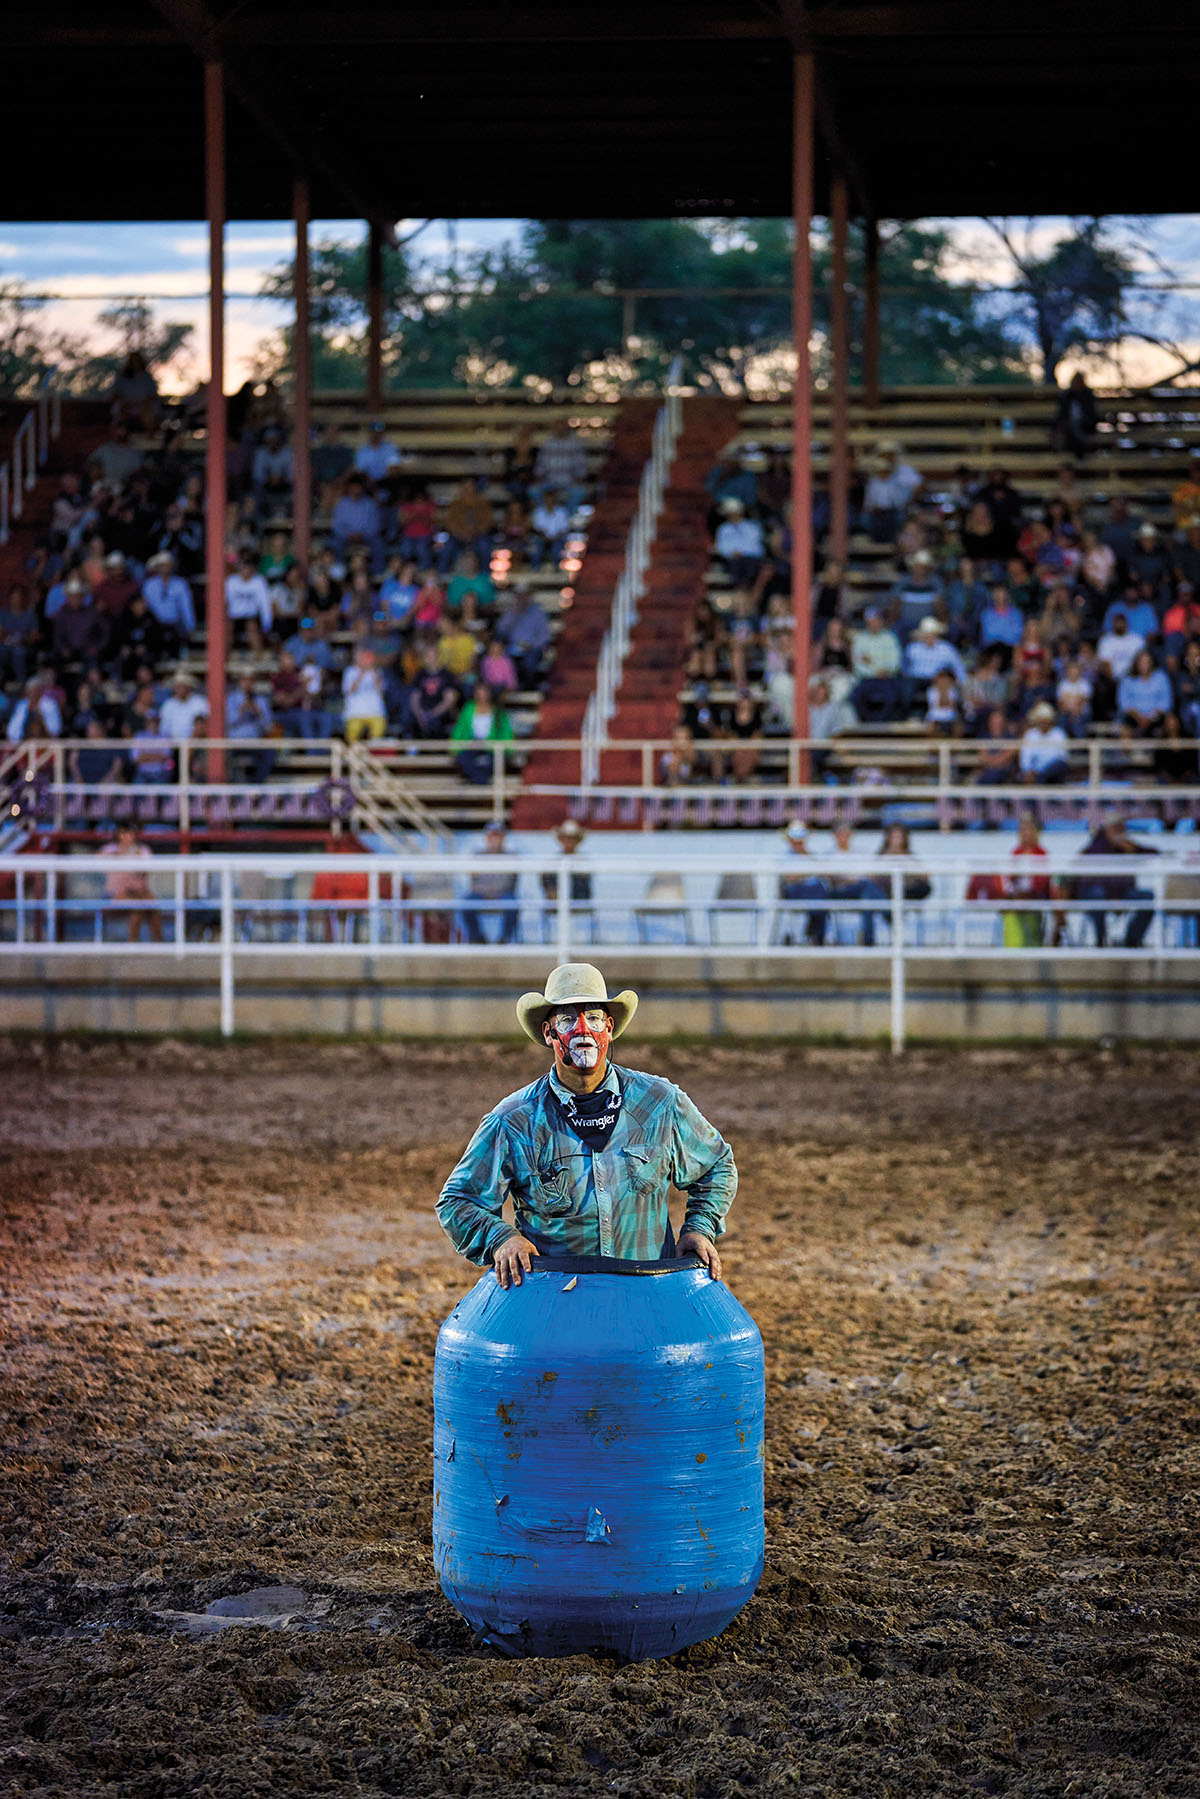 A man in a bright blue shirt, face makeup, and a white hat sits in a large blue barrel in front of a crowd of onlookers